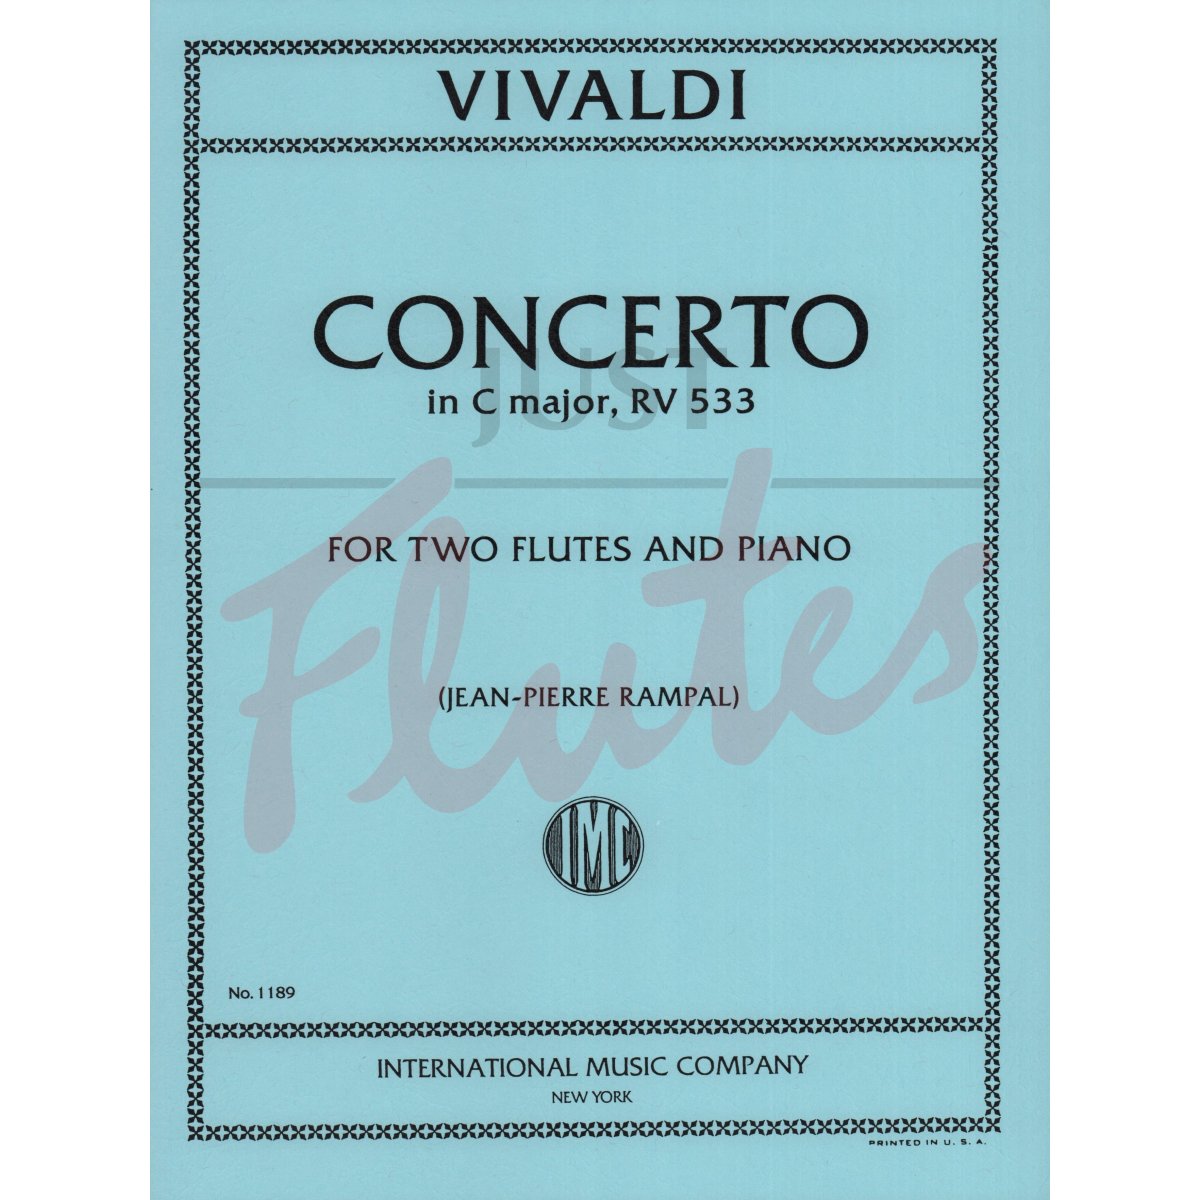 Concerto in C major for Two Flutes and Piano